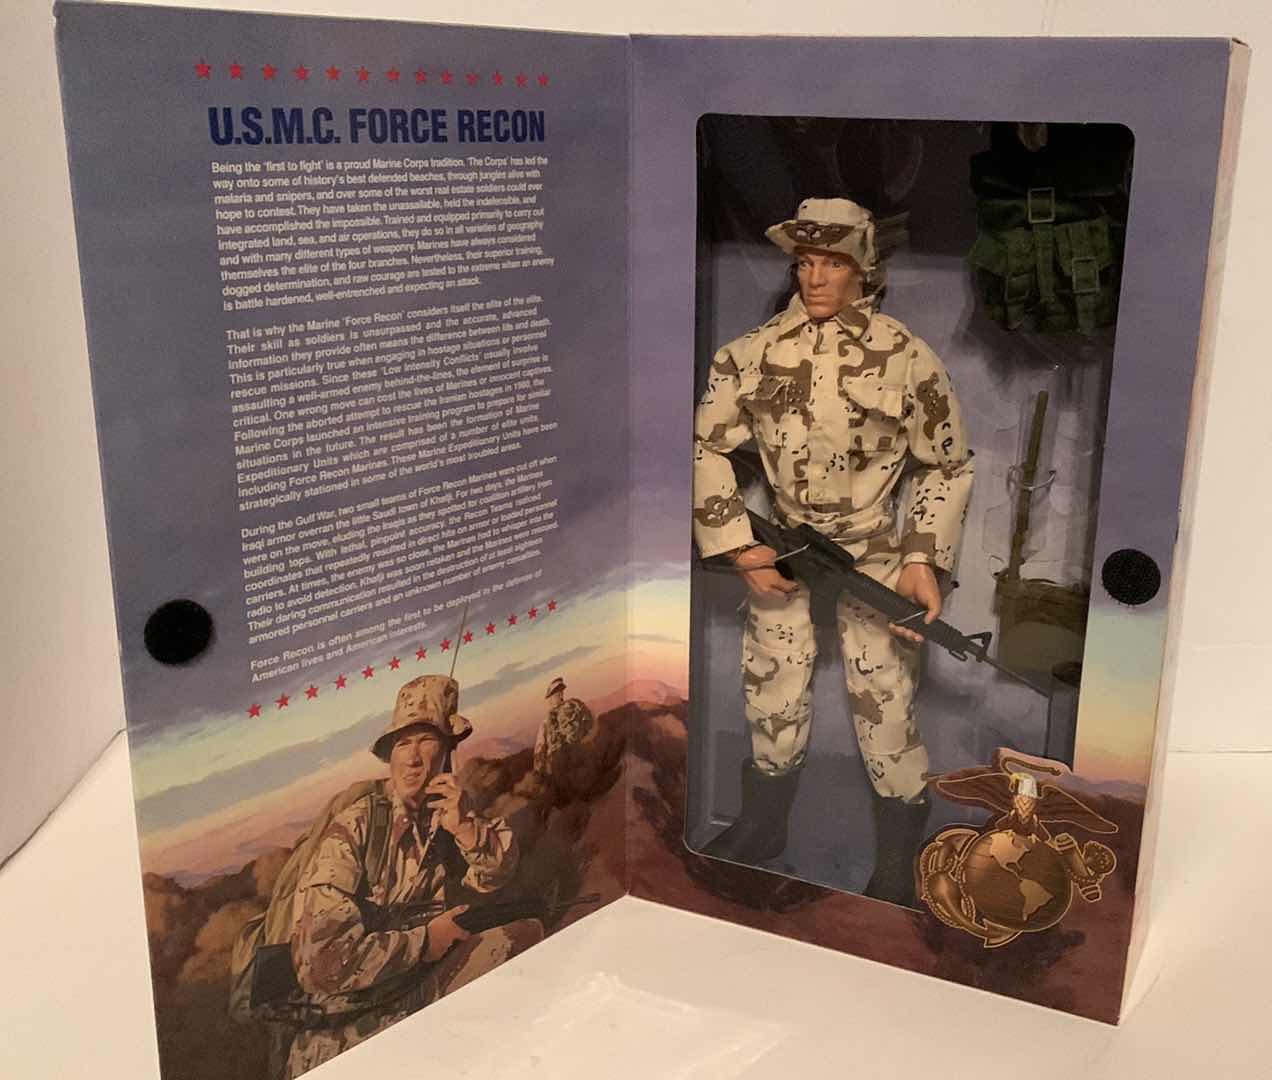 Photo 2 of G.I. JOE CLASSIC COLLECTION 1998 LIMITED EDITION U.S.M.C FORCE RECON